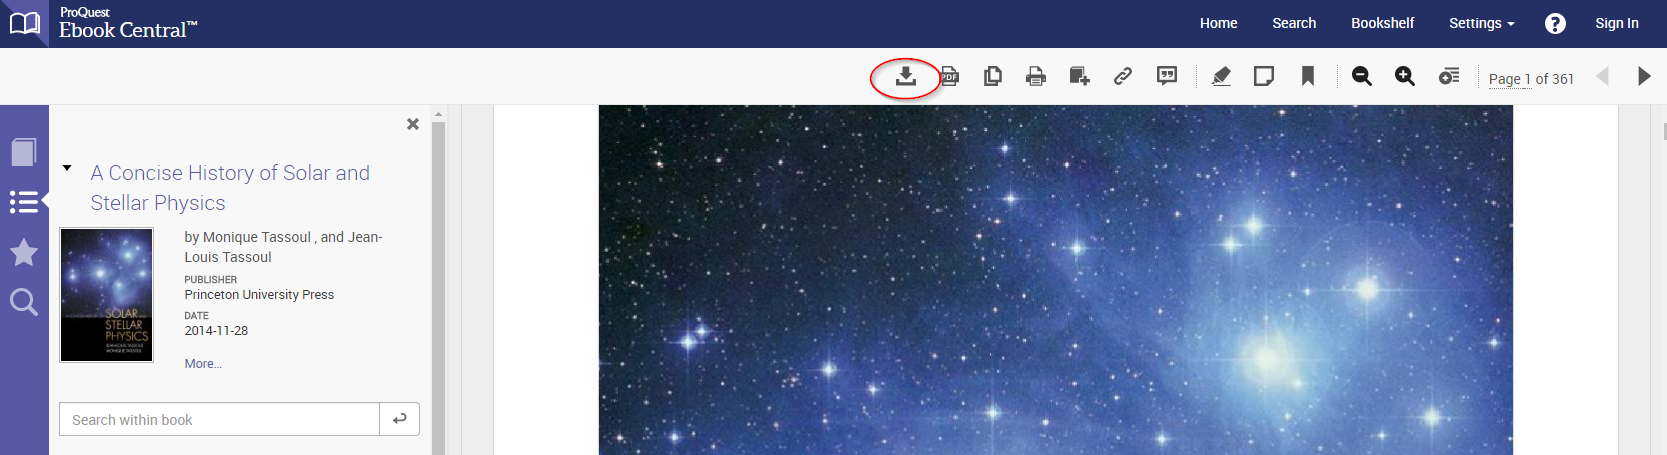 Download button is the first icon along the top of the online reading pane